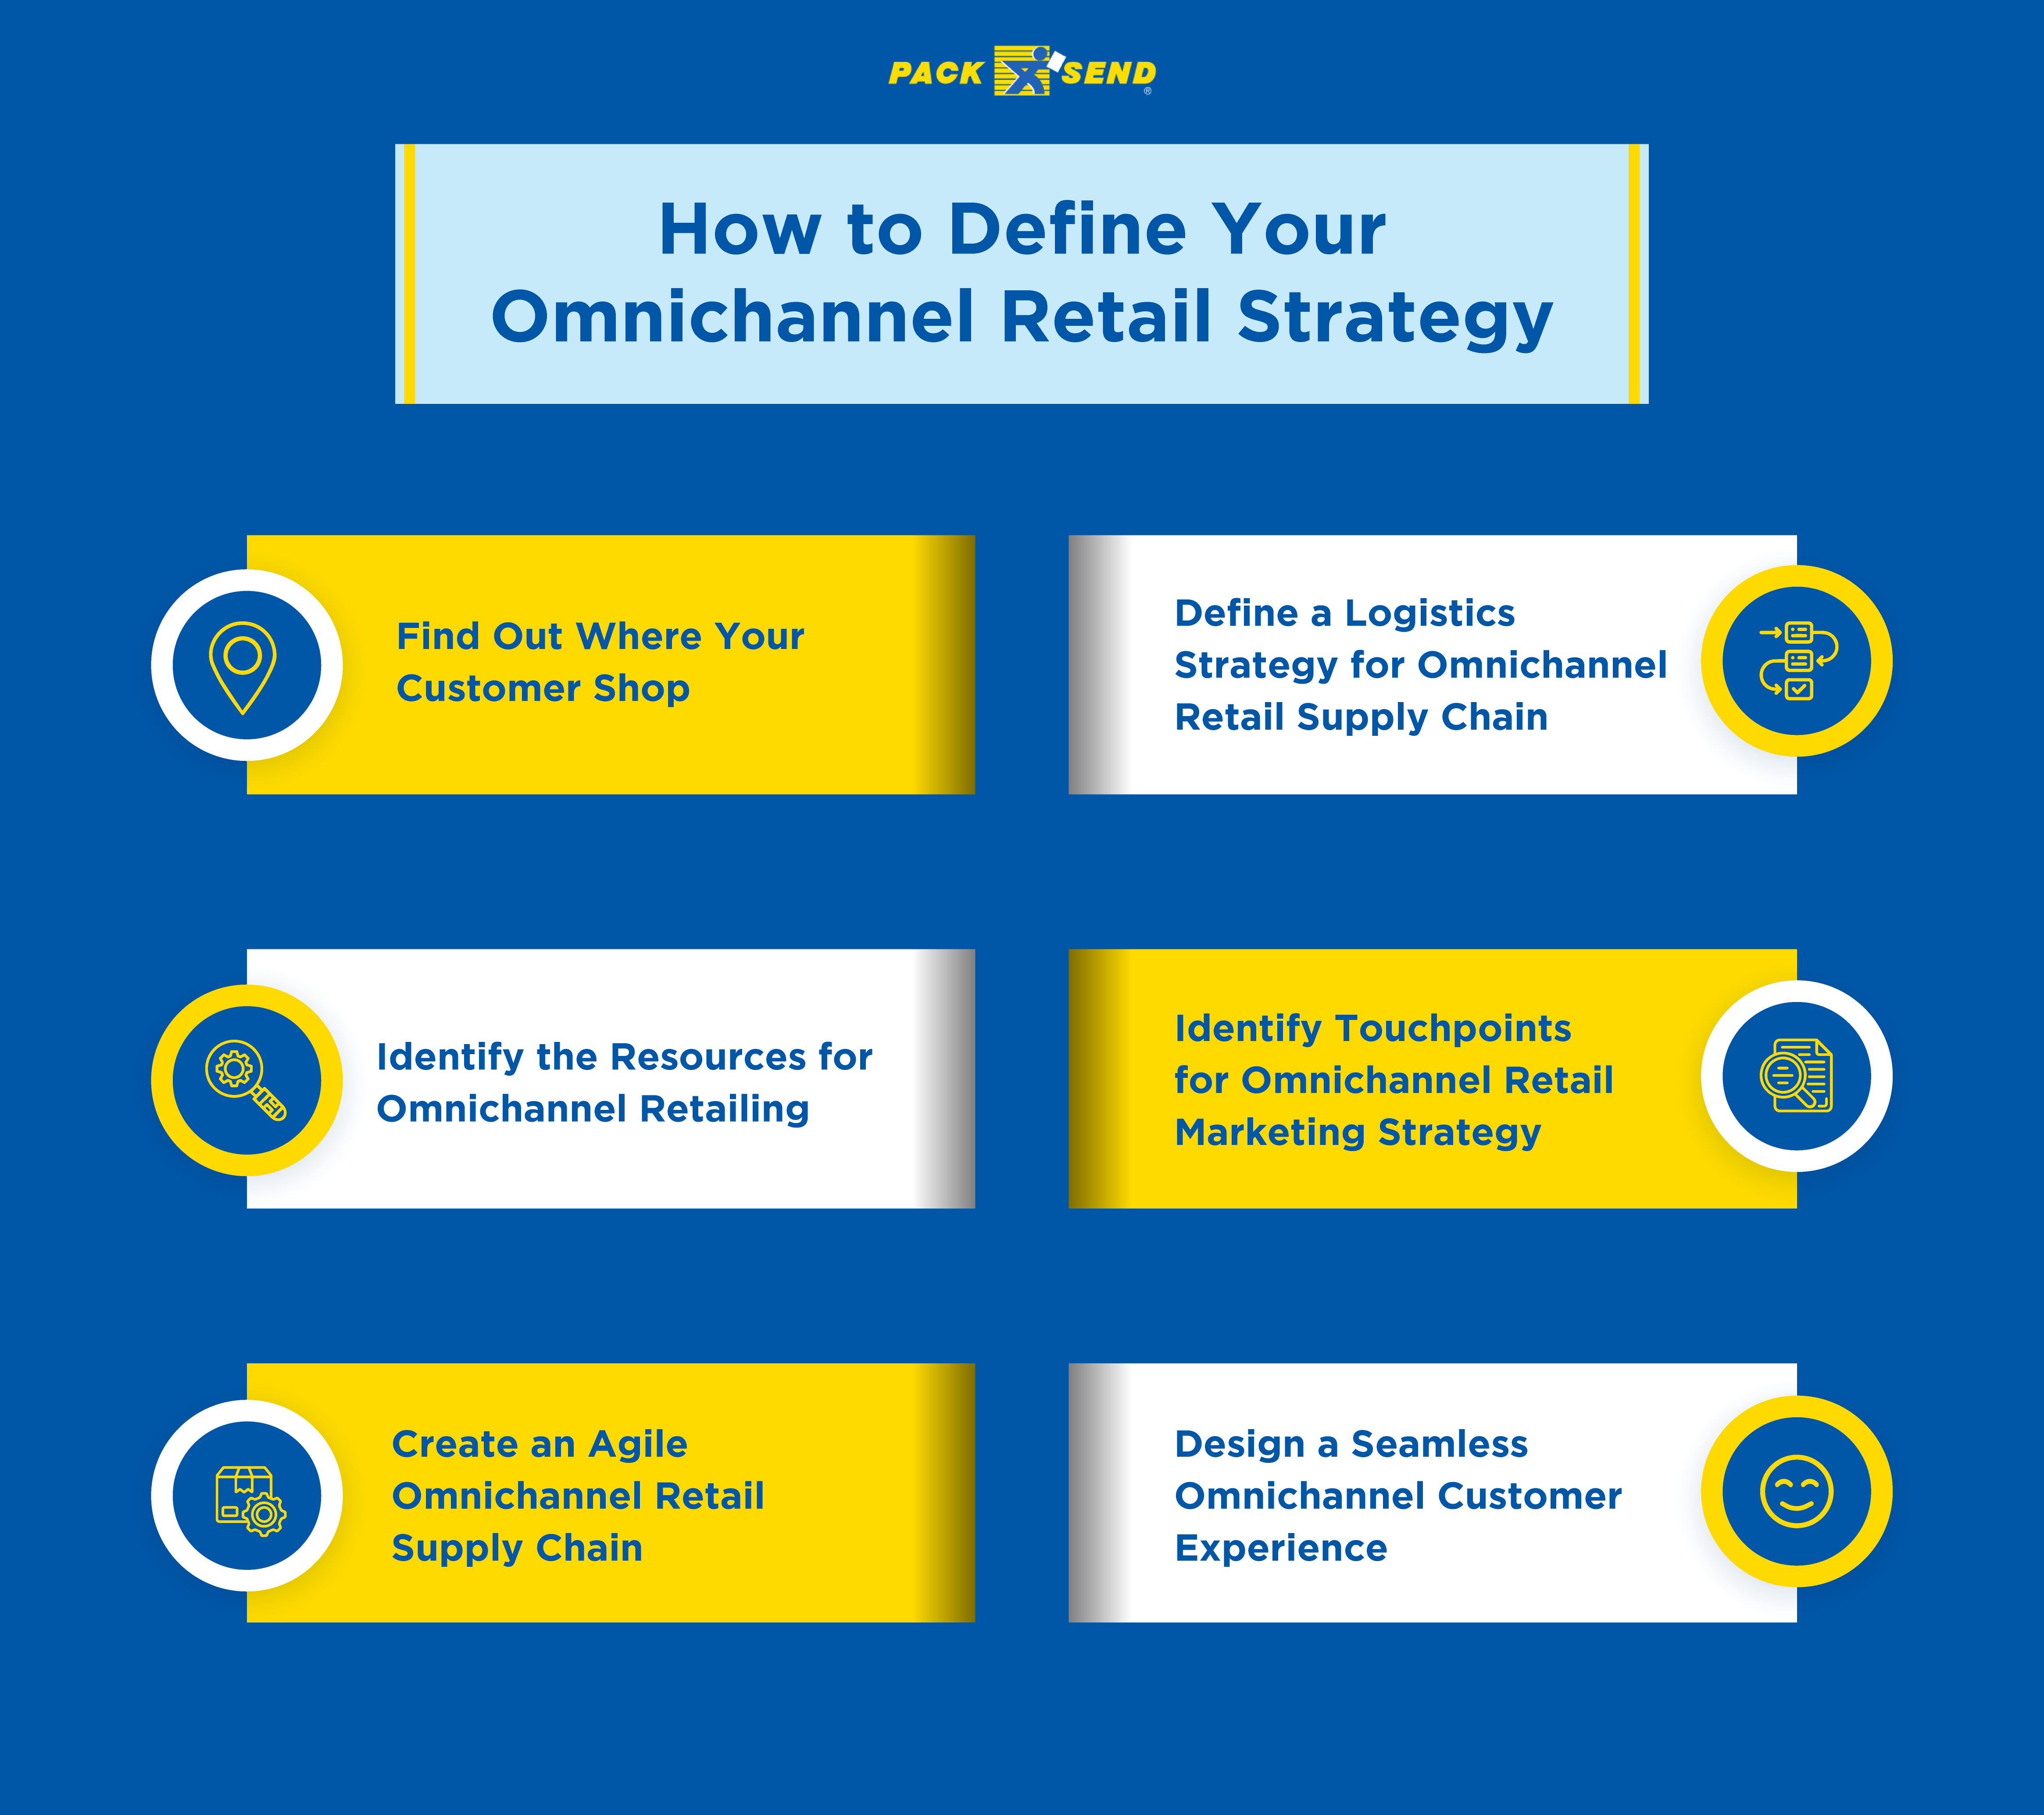 How to Define Your Omnichannel Retail Strategy